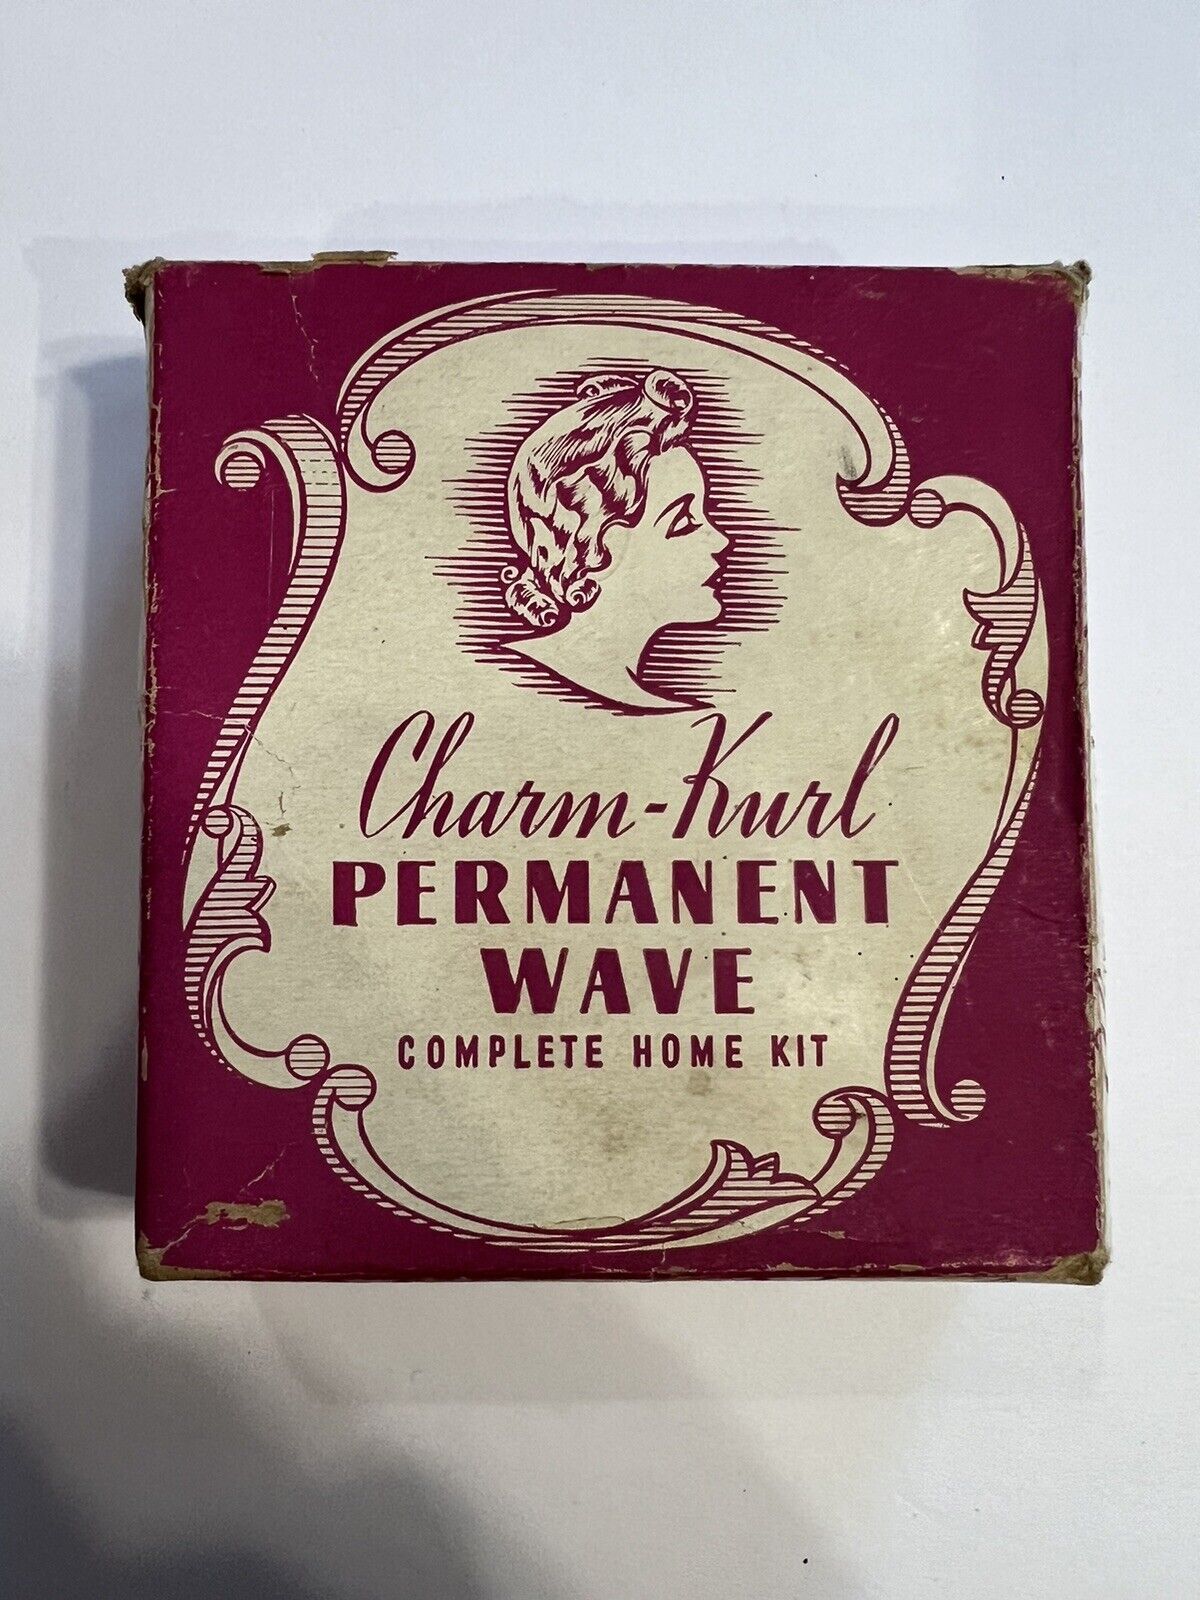 Charm Kurl Permanent Wave Complete Home Kit - Vtg in Box, Looks complete